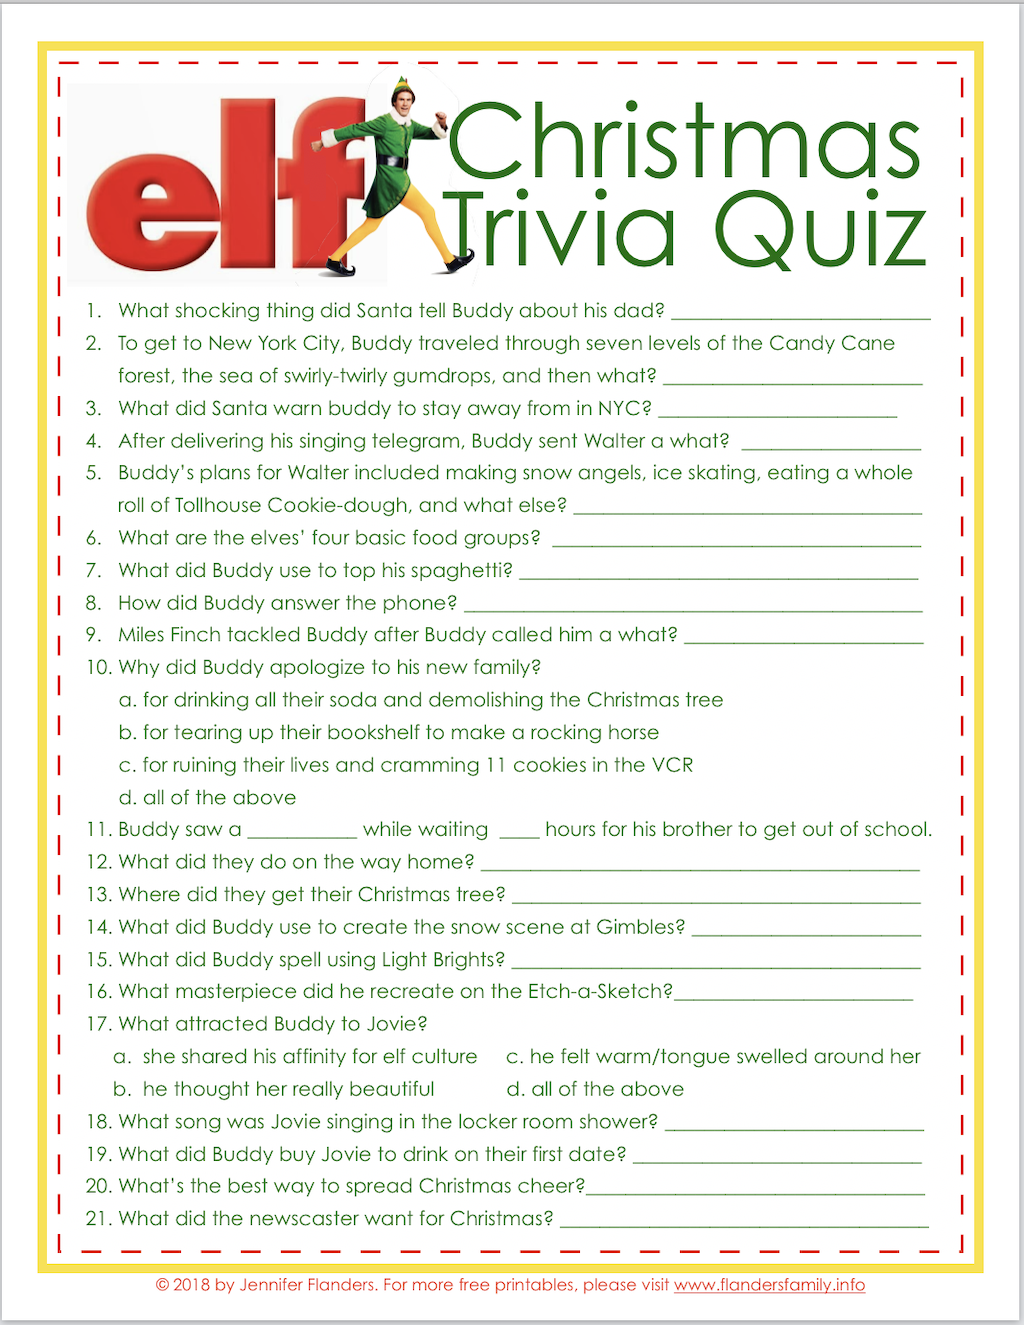 free-printable-christmas-picture-quiz-with-answers-printable-blog